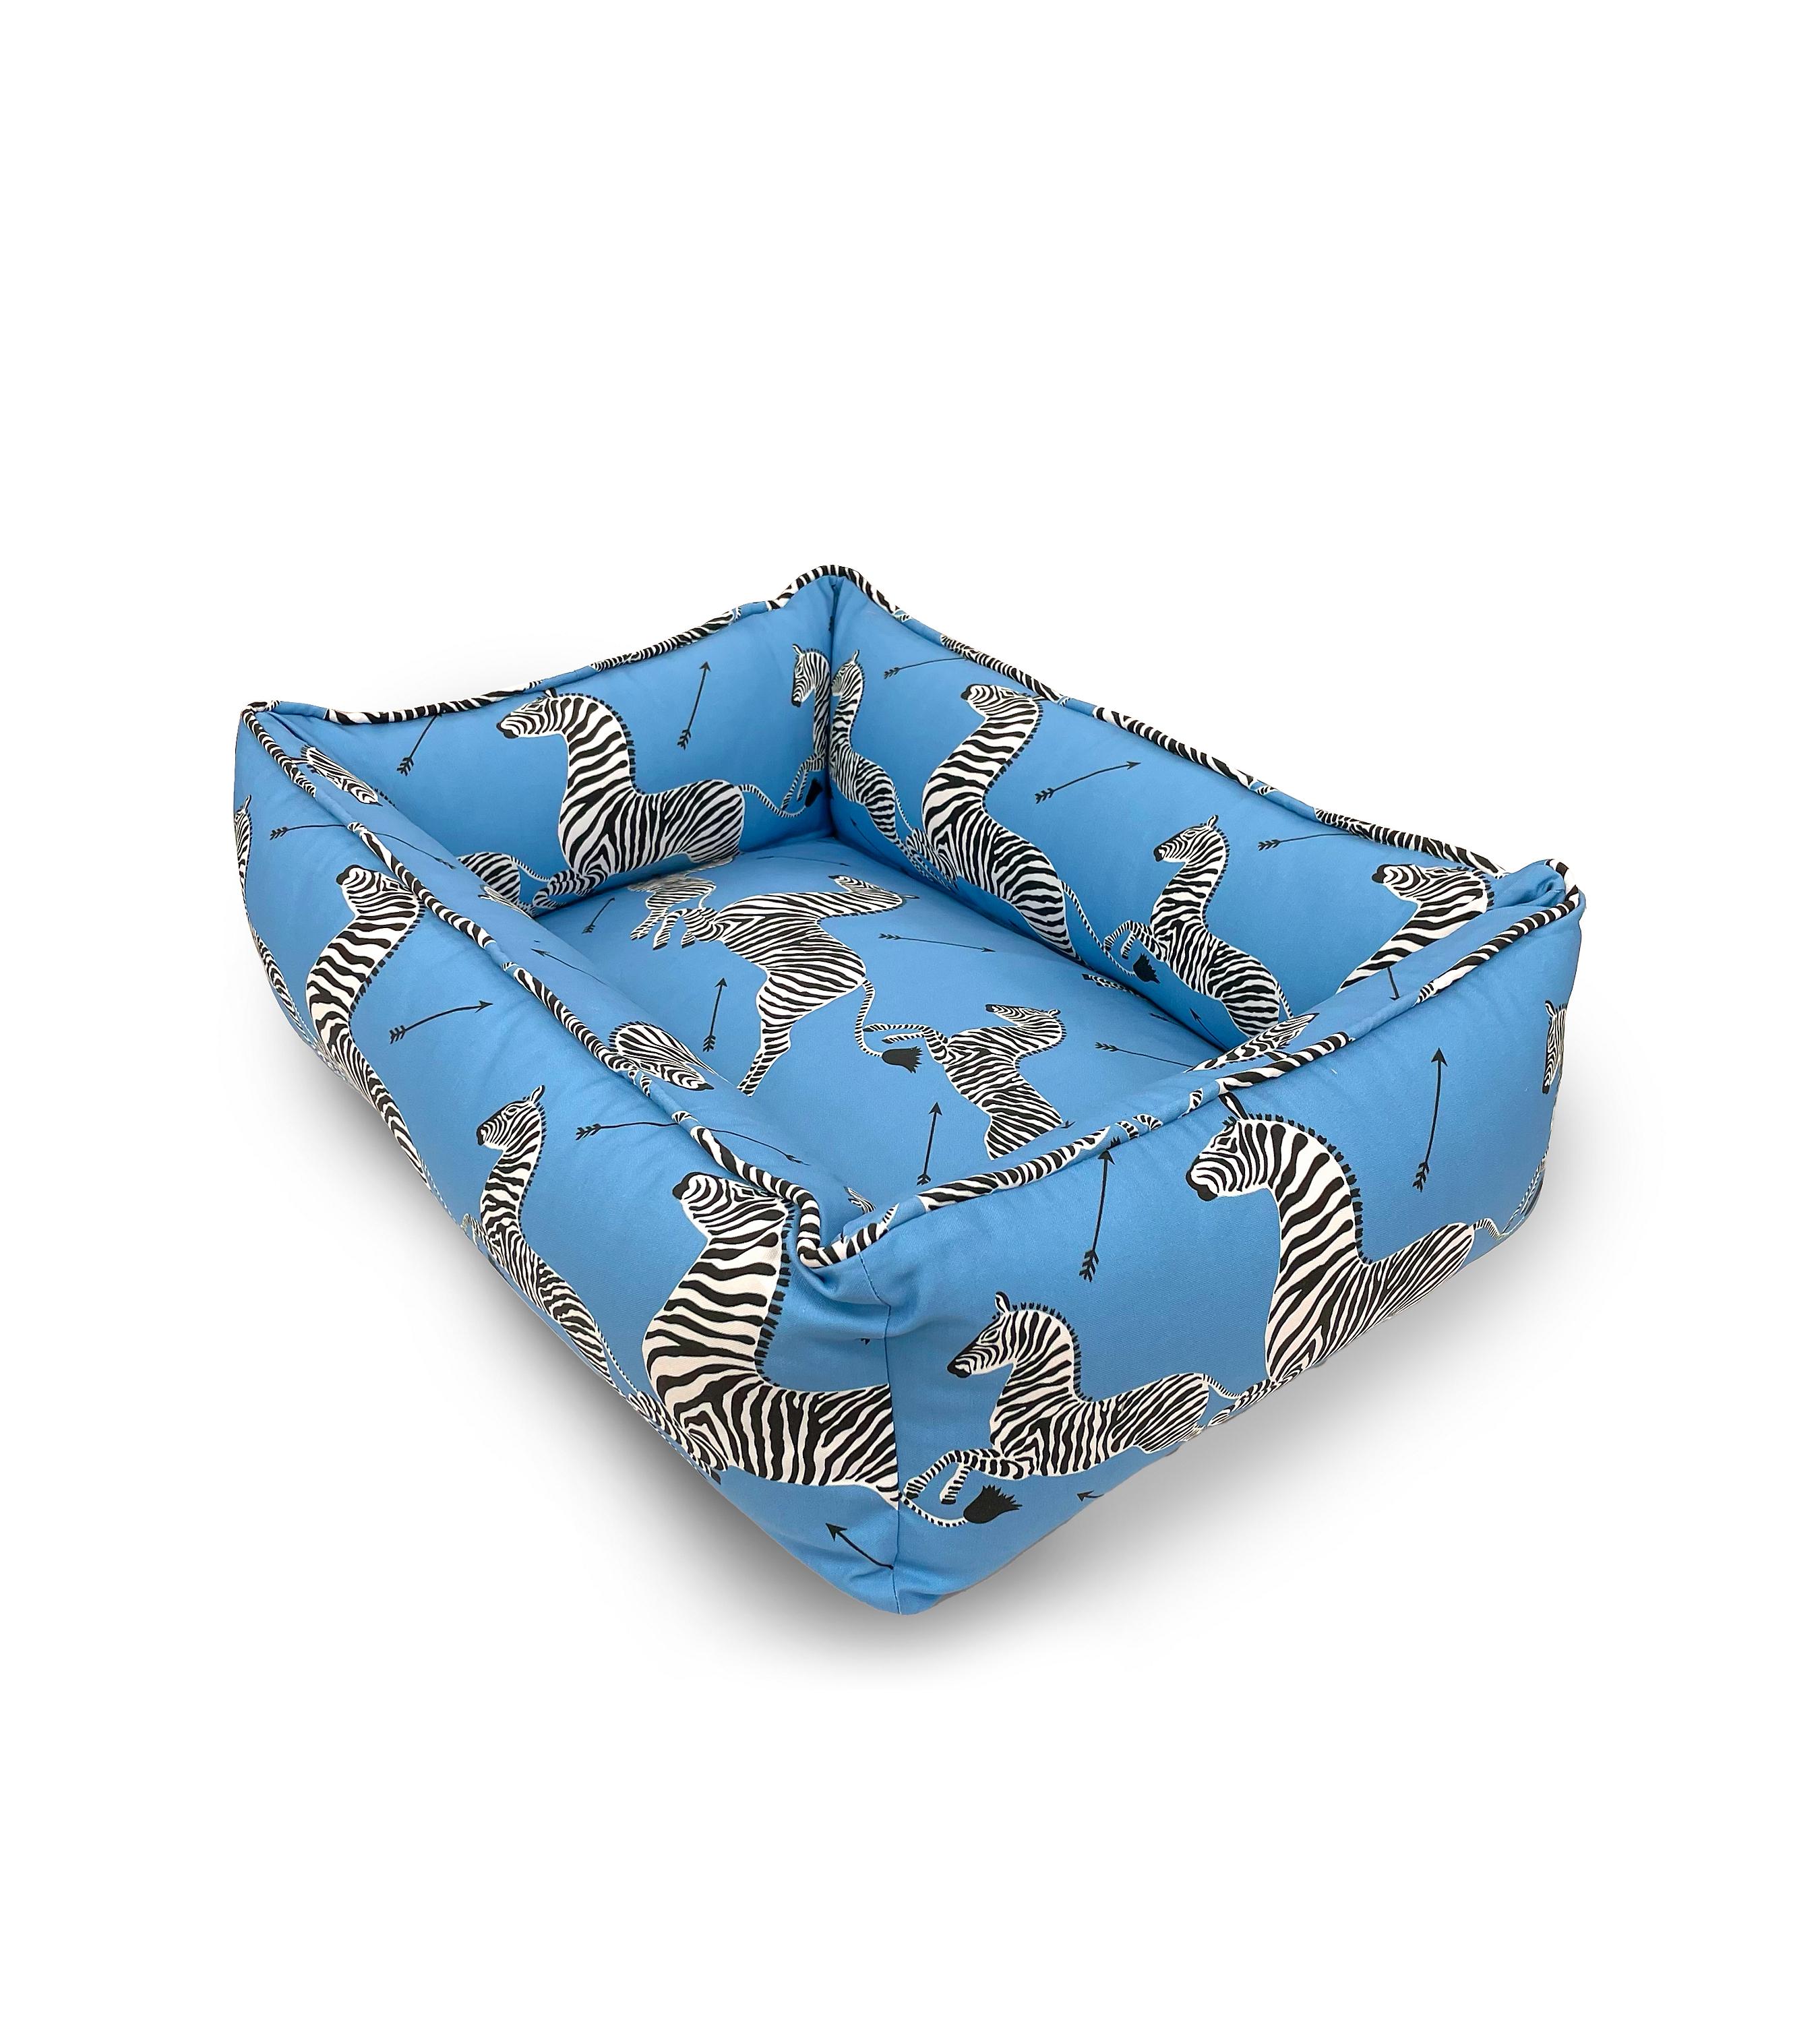 North American Scalamandre Zebras Dog Bed Small For Sale